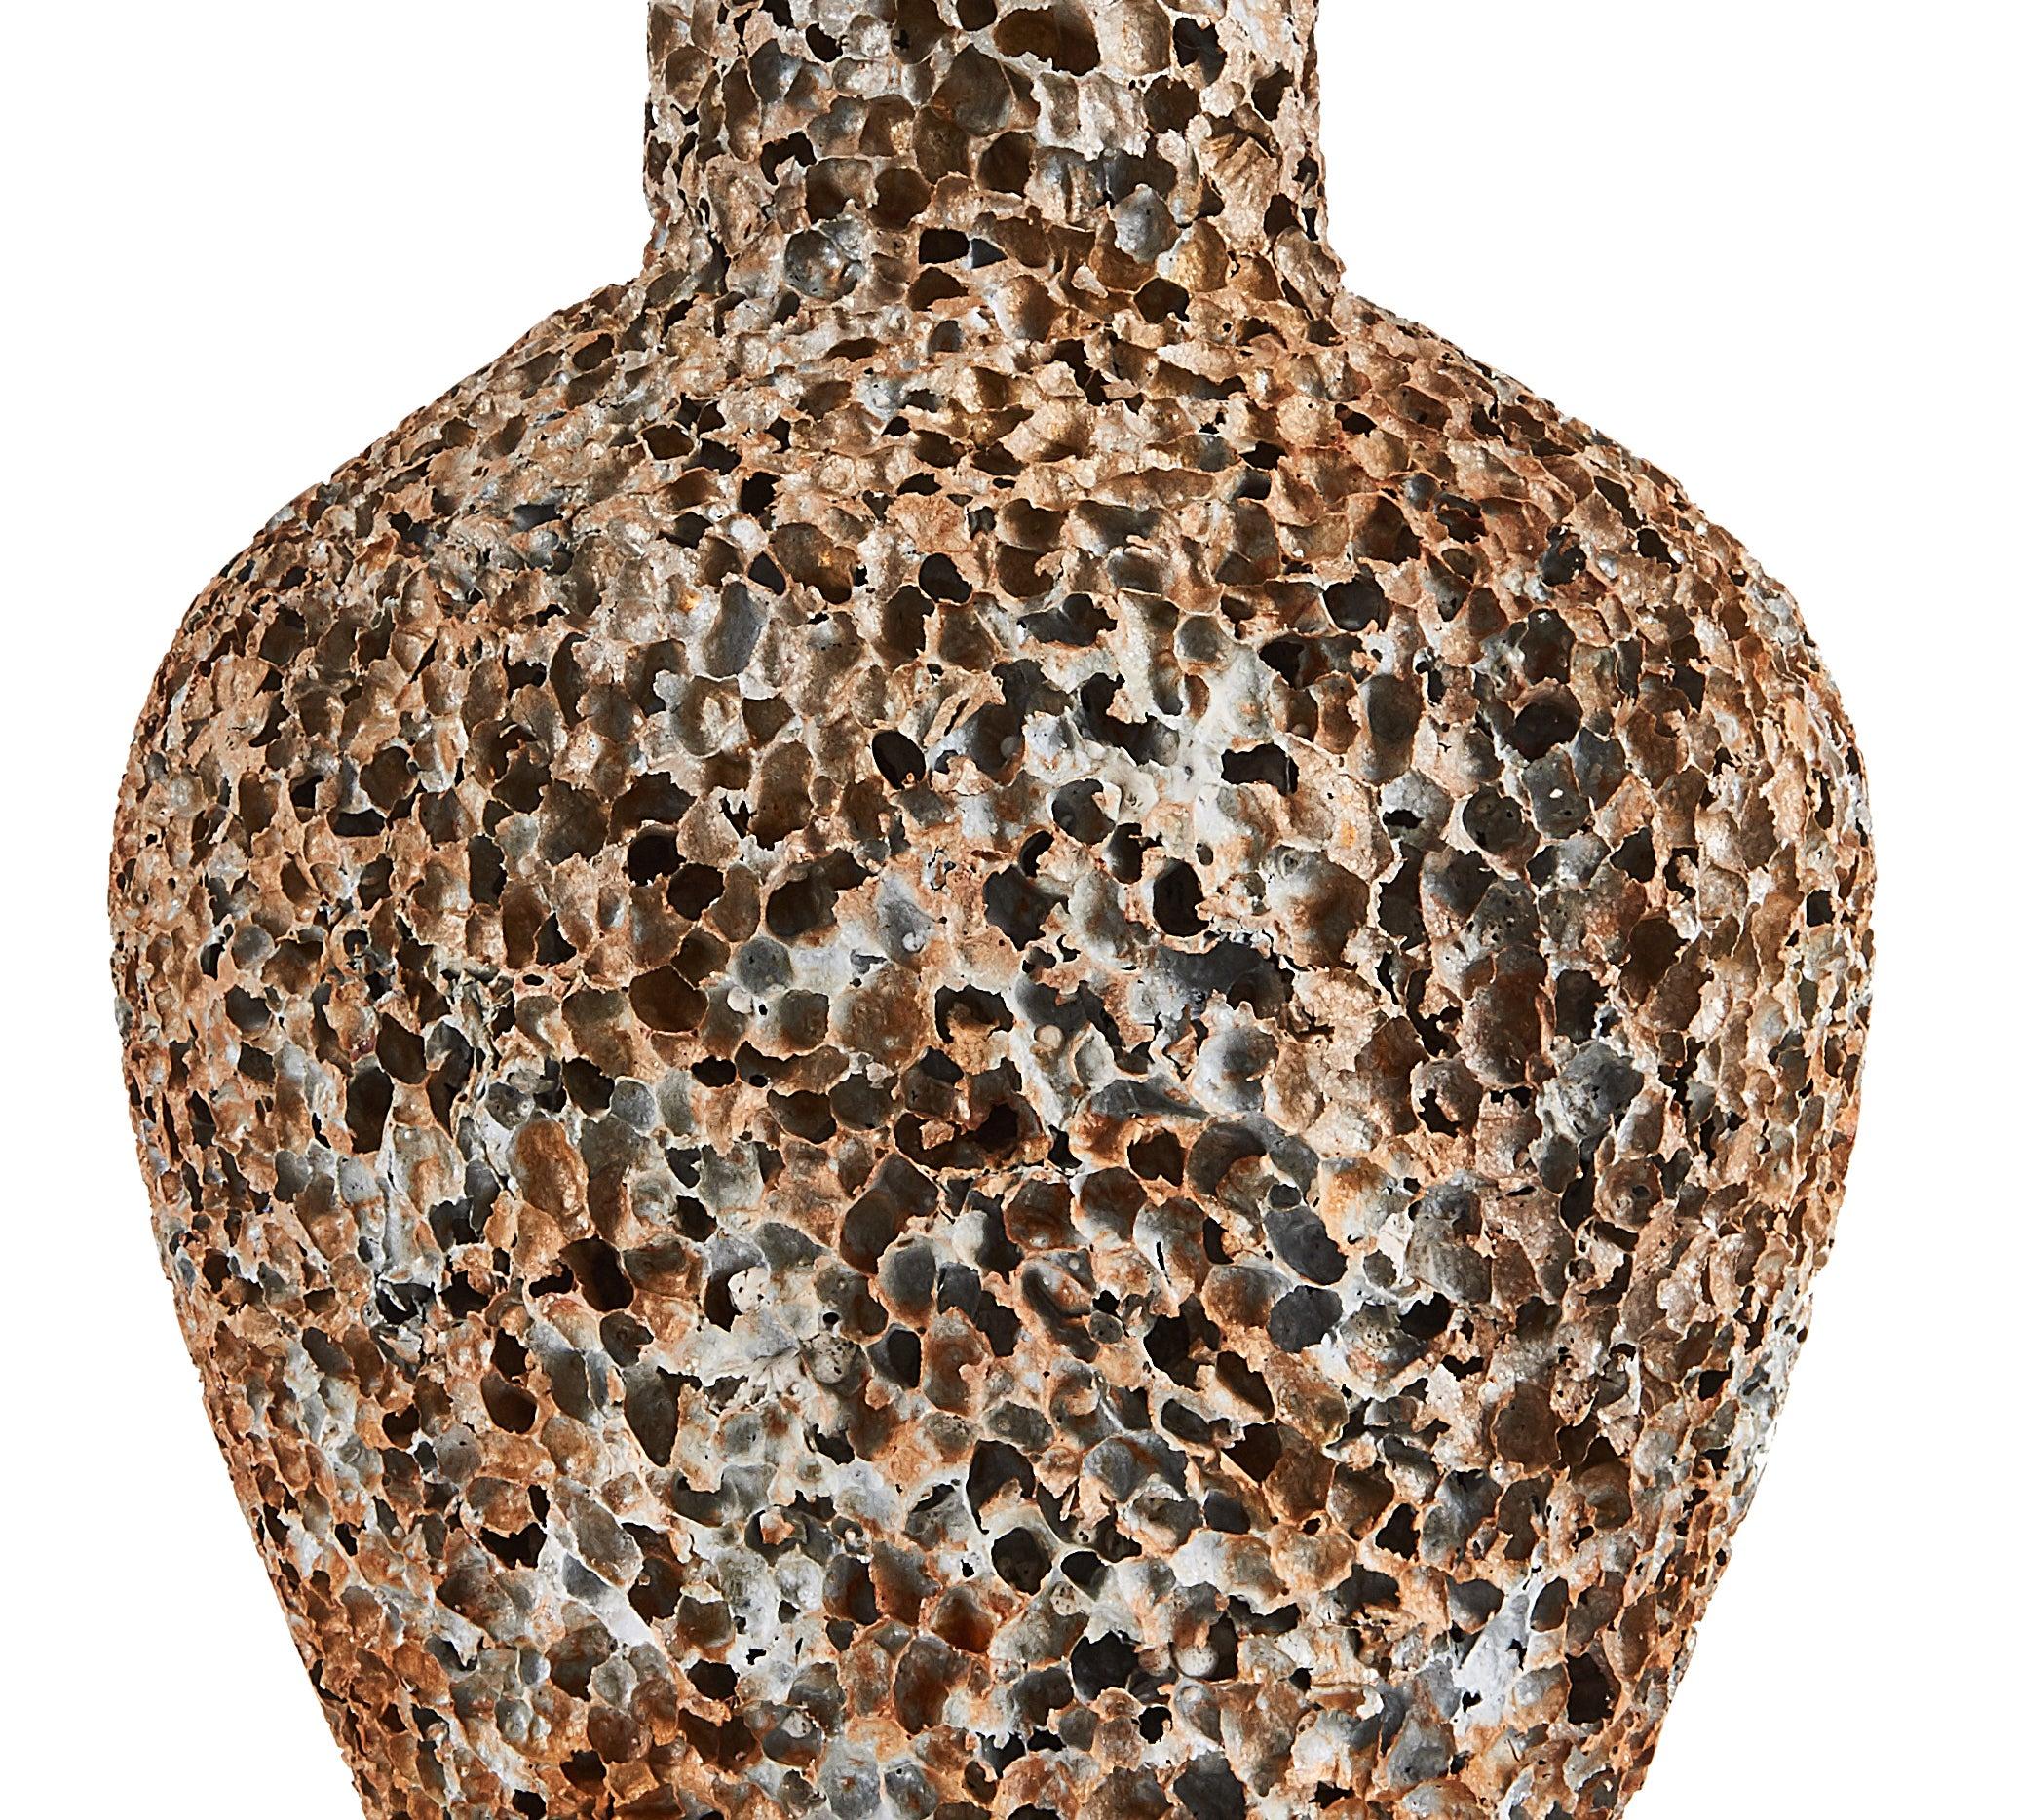 Hong Kong Dynasty Vase #5, Earth Colored Table Vessel Aluminium Foam by Michael Young For Sale